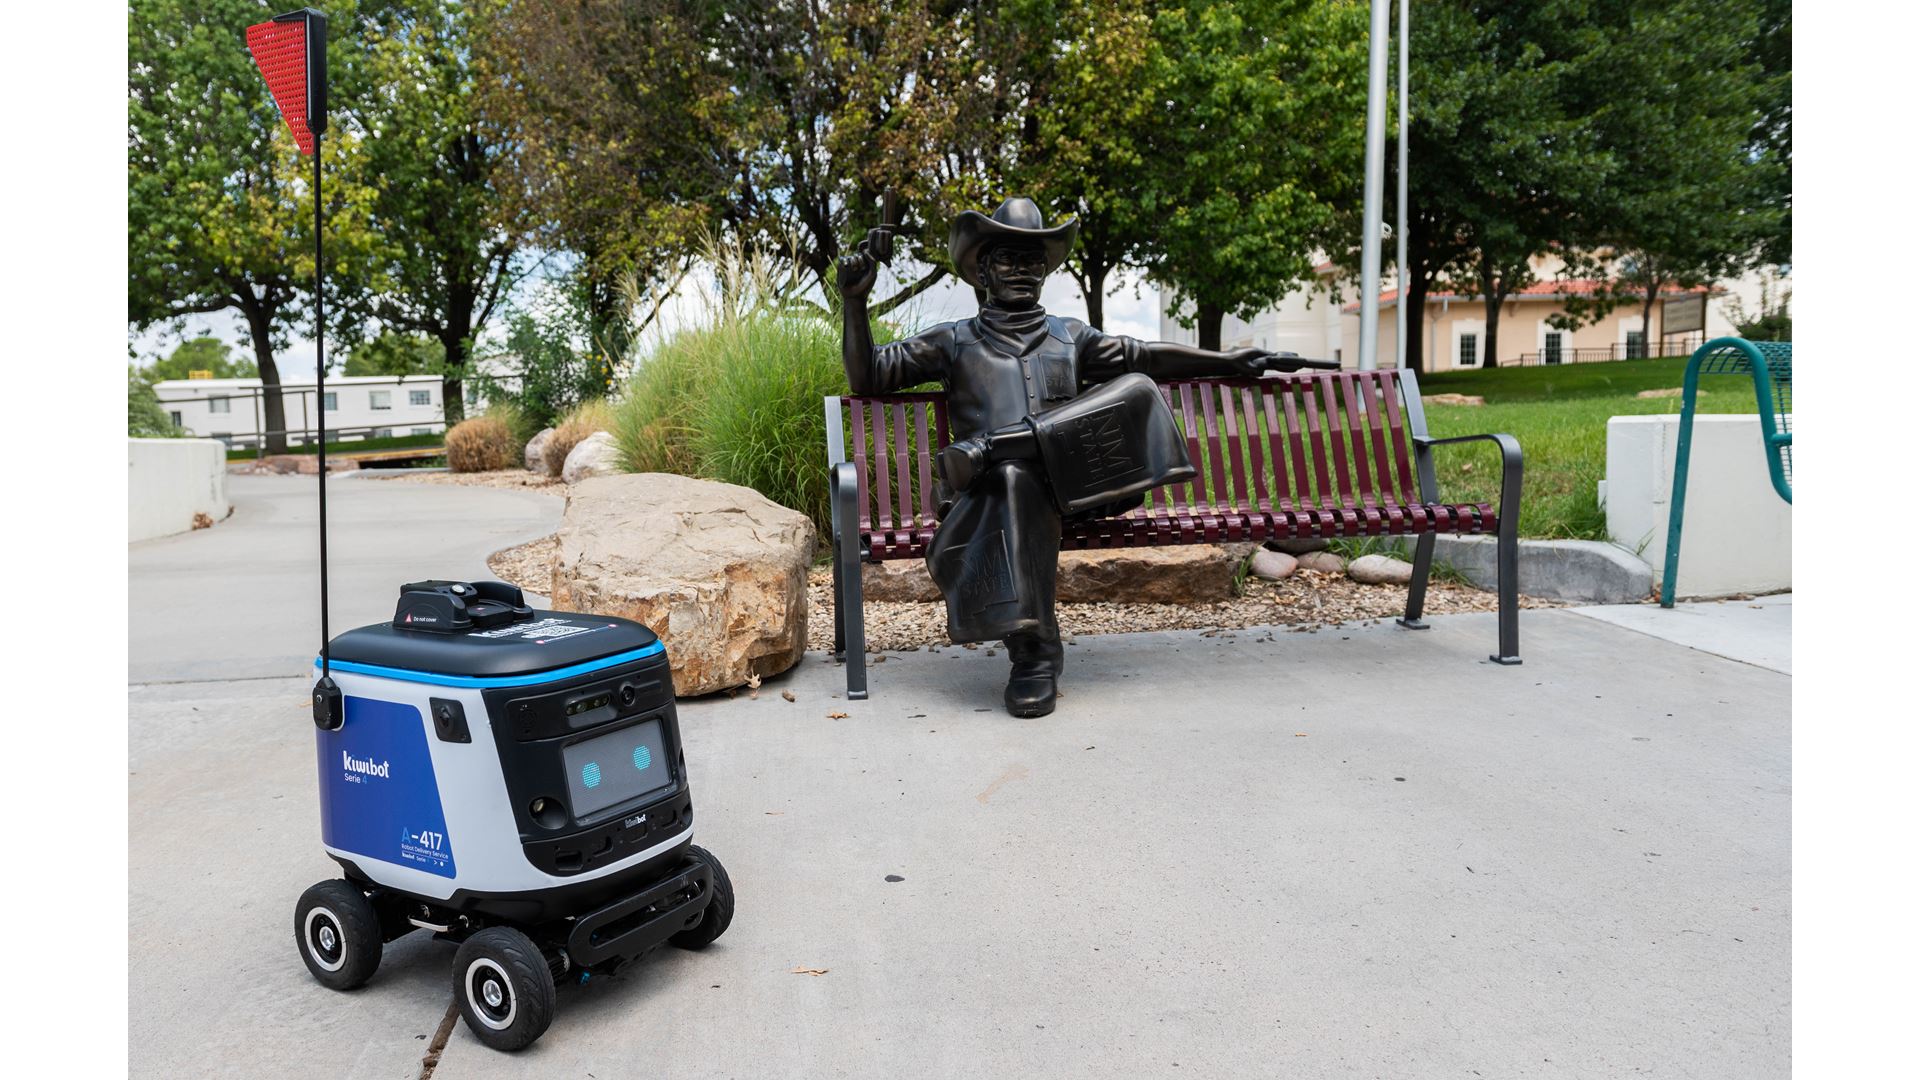 The robots have landed: Kiwibot delivering fast, hot food to NMSU campus community